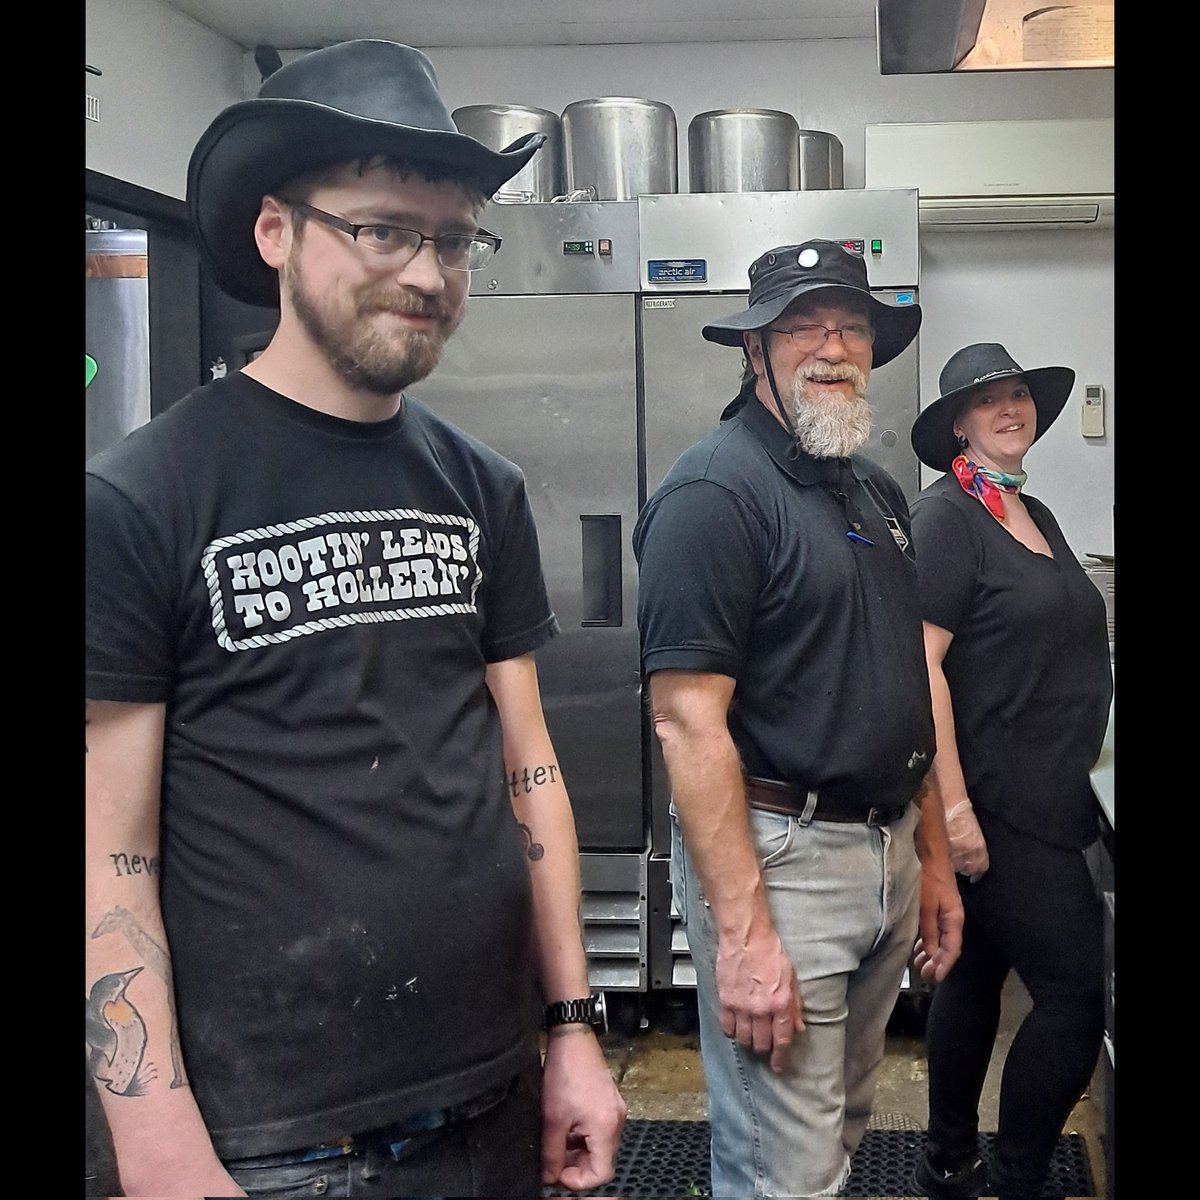 These rascally varmints, 'The Chuckwagon Posse,' are hootin' and hollerin' all night in our Bistro. (It's okay. They're cookin', too.) 🤣 #TritonBistro #BrewedOnBase